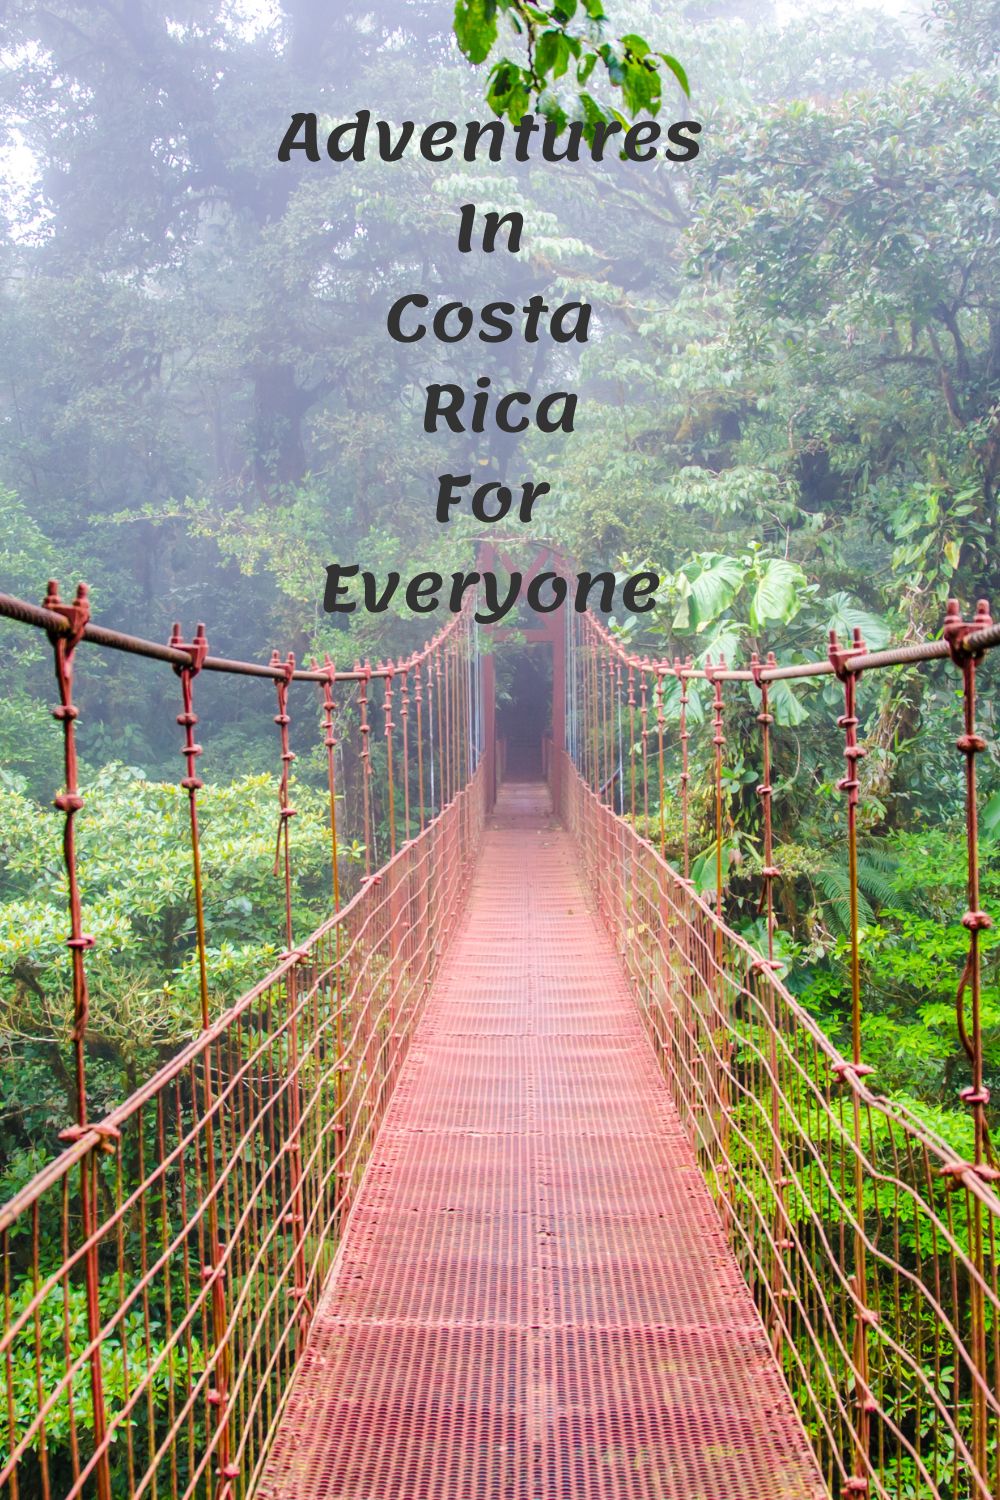 8 Thrilling Adventures in Costa Rica With Big Adrenaline Rushes